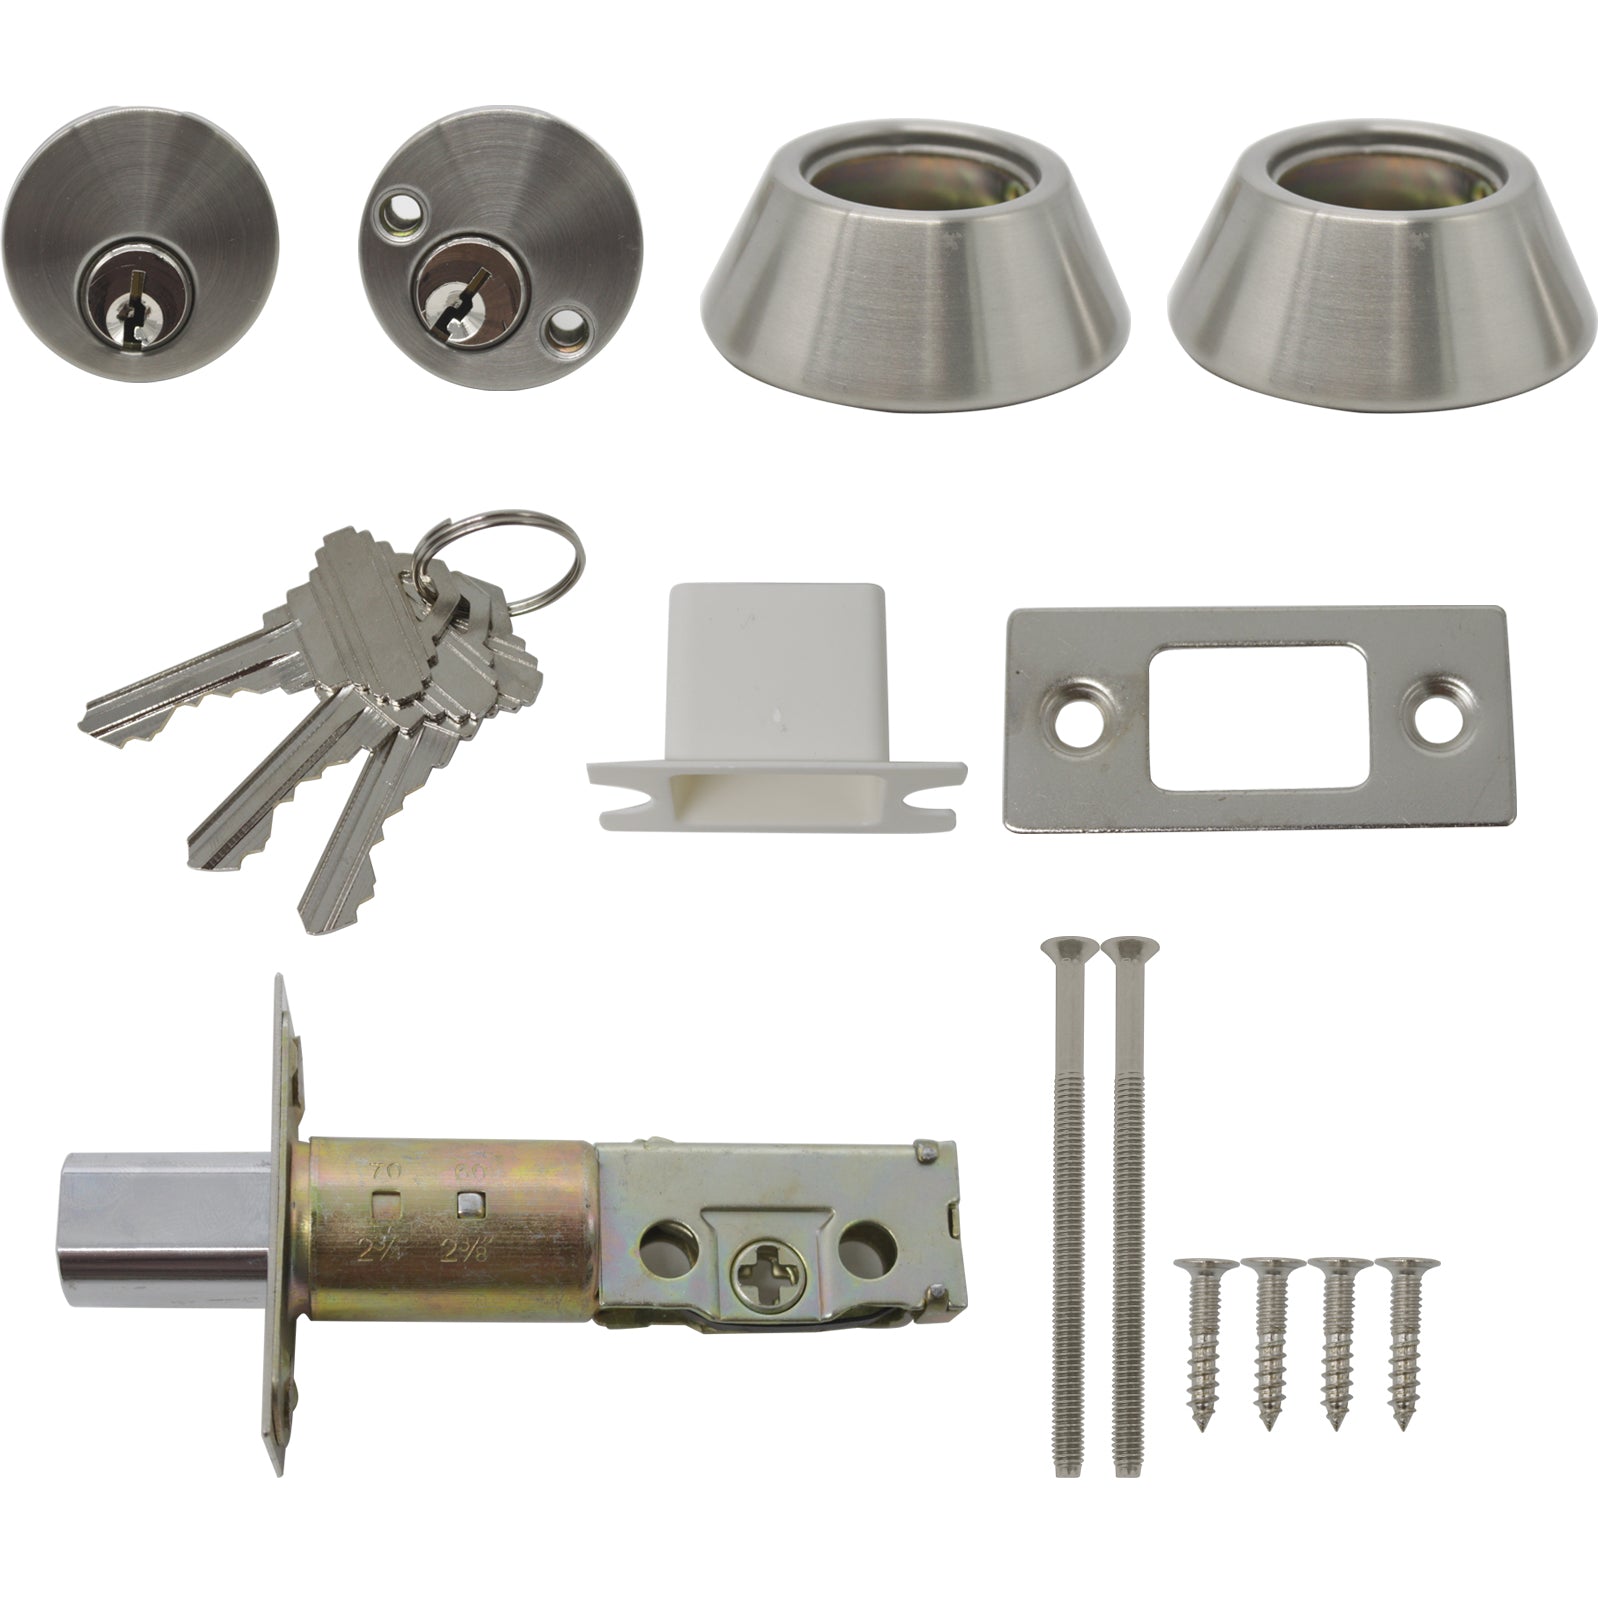 Double Cylinder Deadbolts with Key on Both Side, Keyed Entry Door Lock Satin Nickel Finish DLD102SN - Probrico